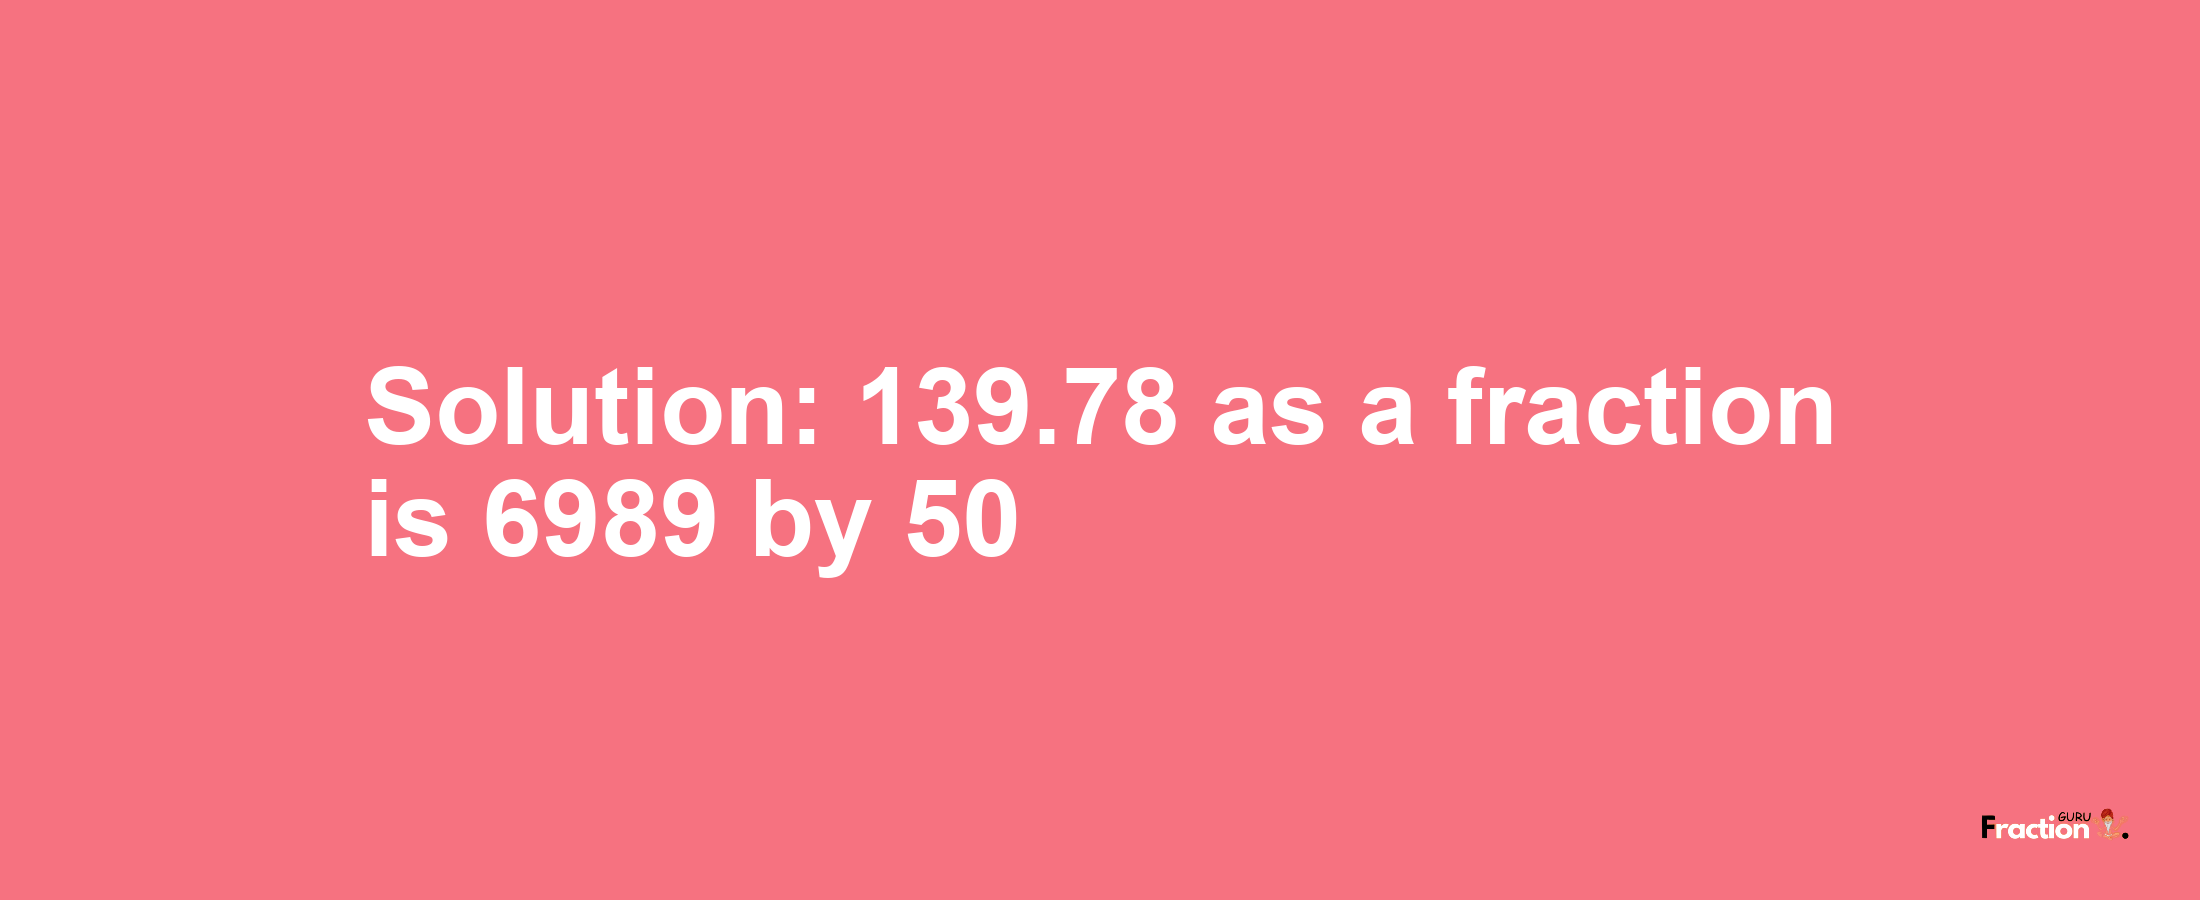 Solution:139.78 as a fraction is 6989/50